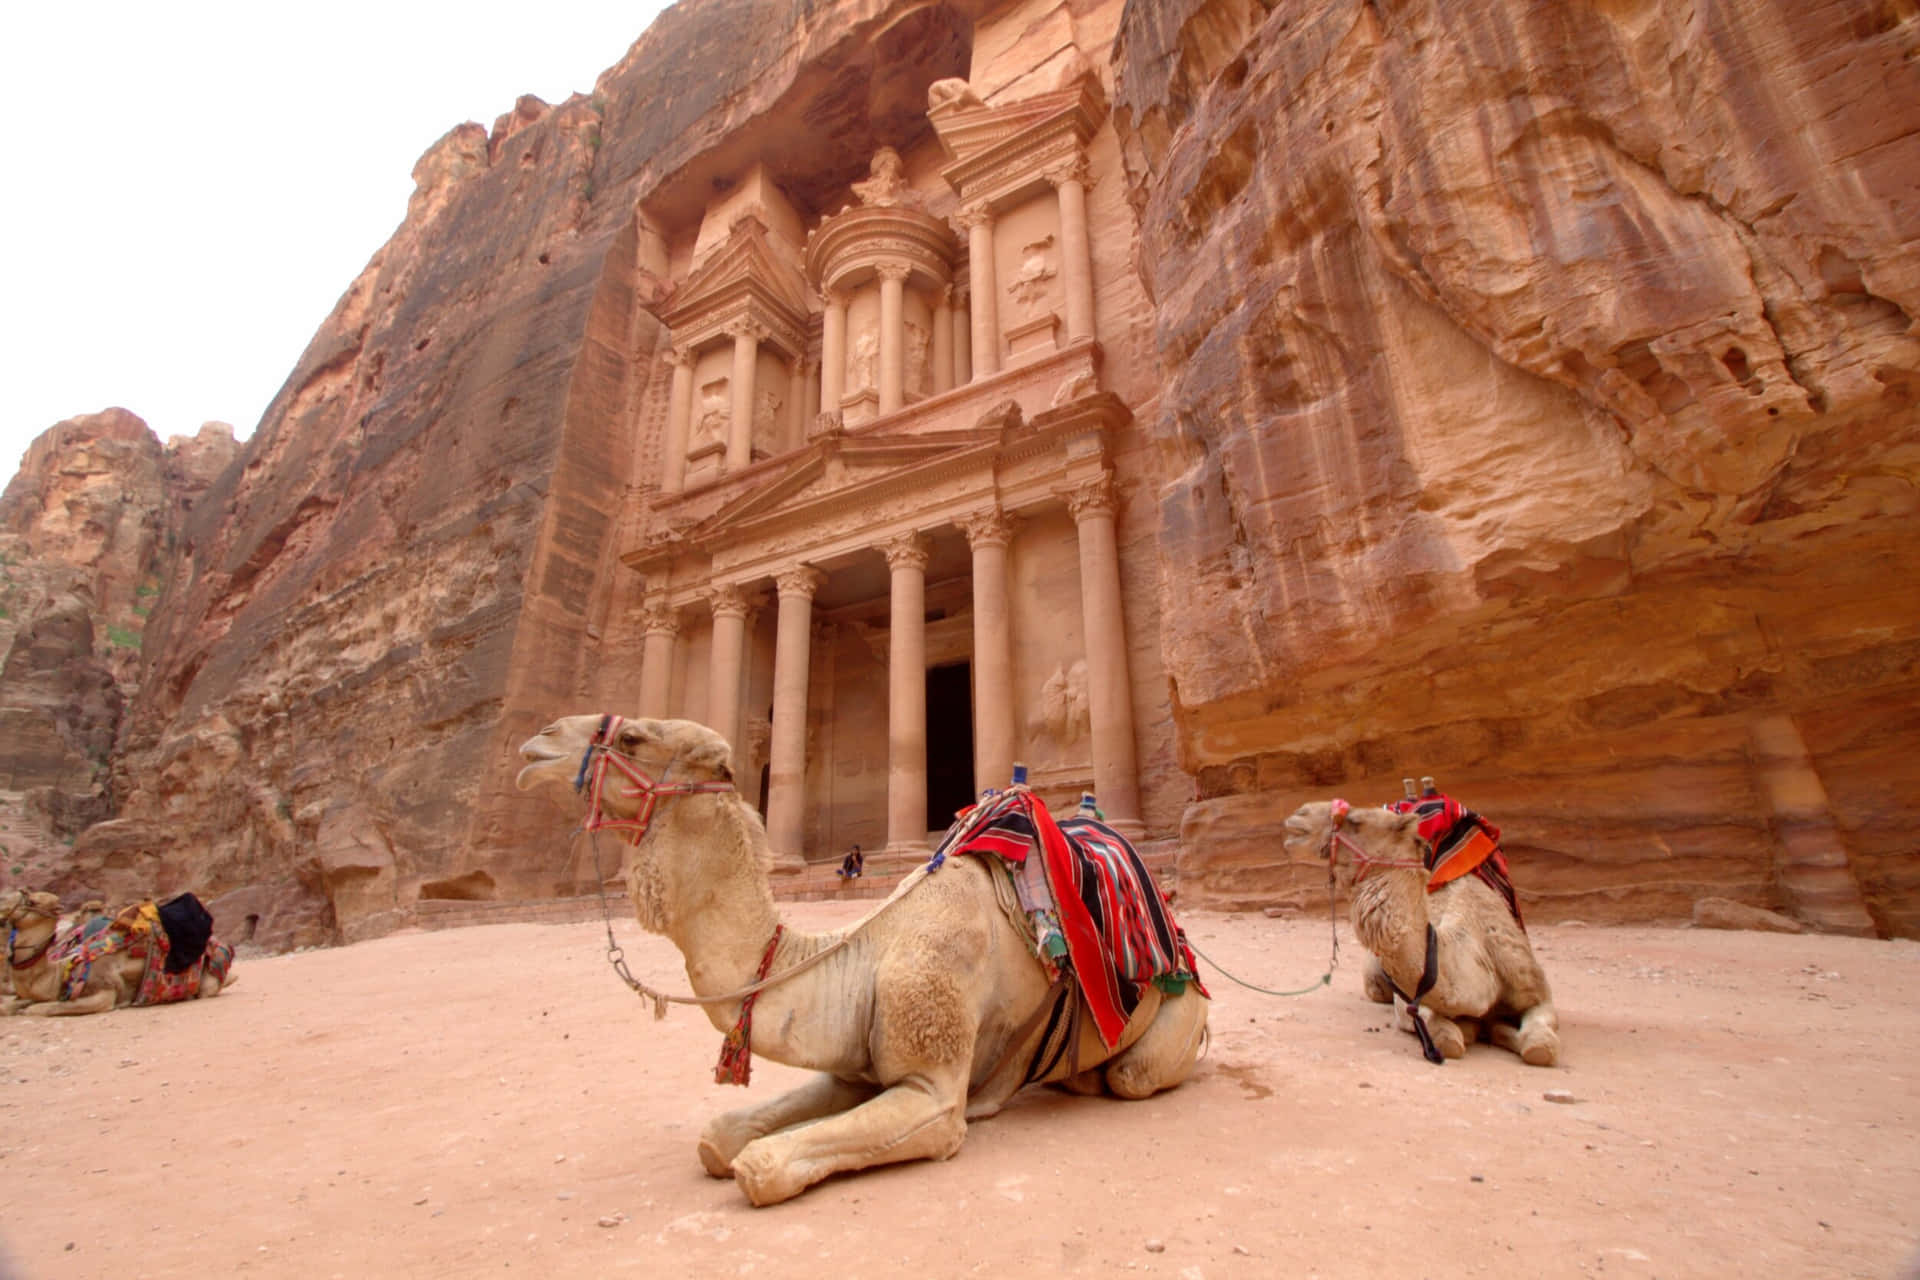 Camels resting at the archaeological site of Petra Wallpaper